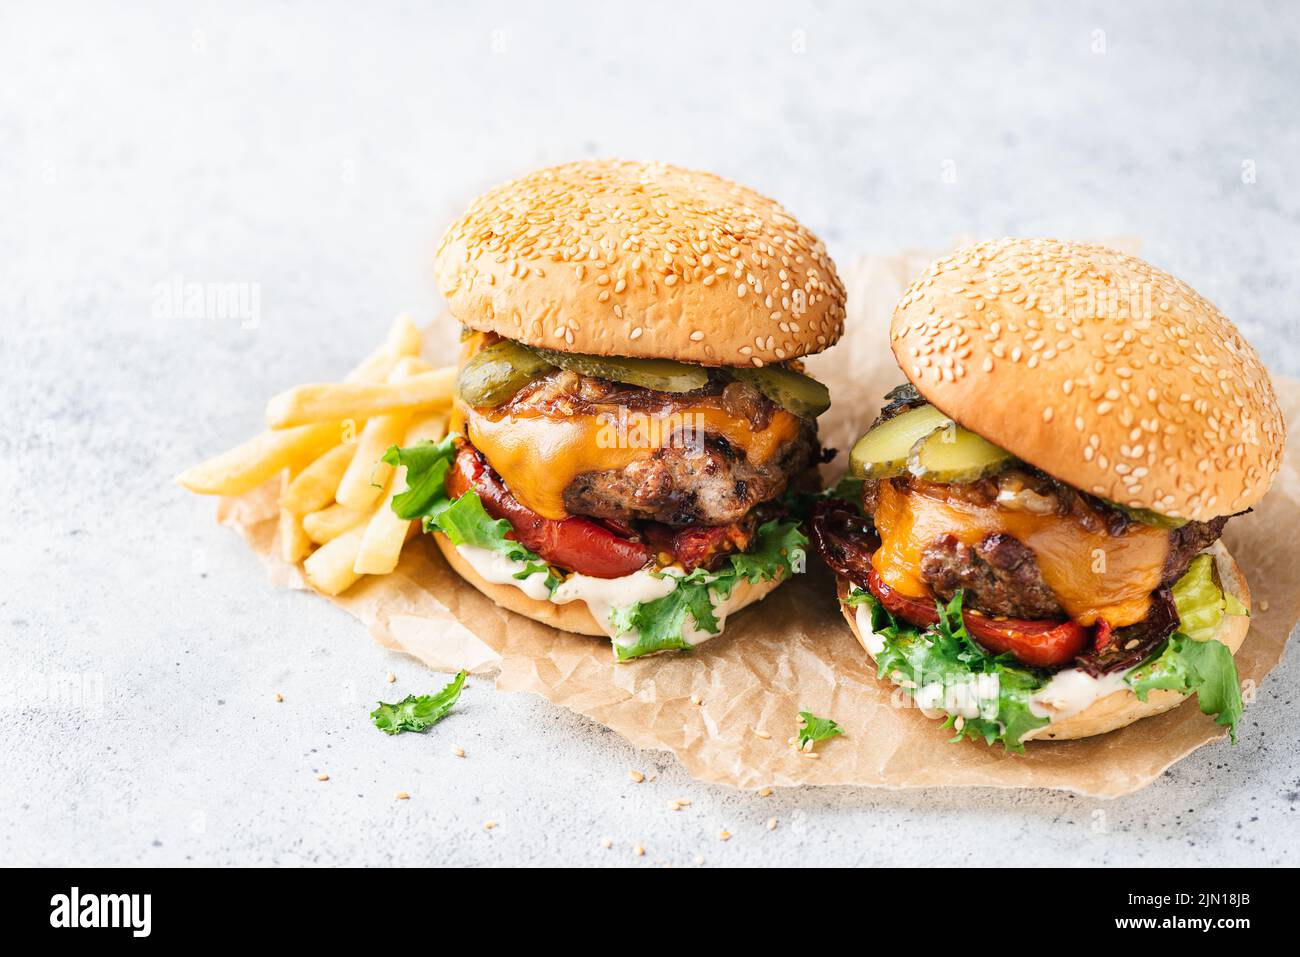 Cheeseburger with grilled red bell pepper, arugula and dill pickles served on parchment paper. Grey stone backgdrop Stock Photo